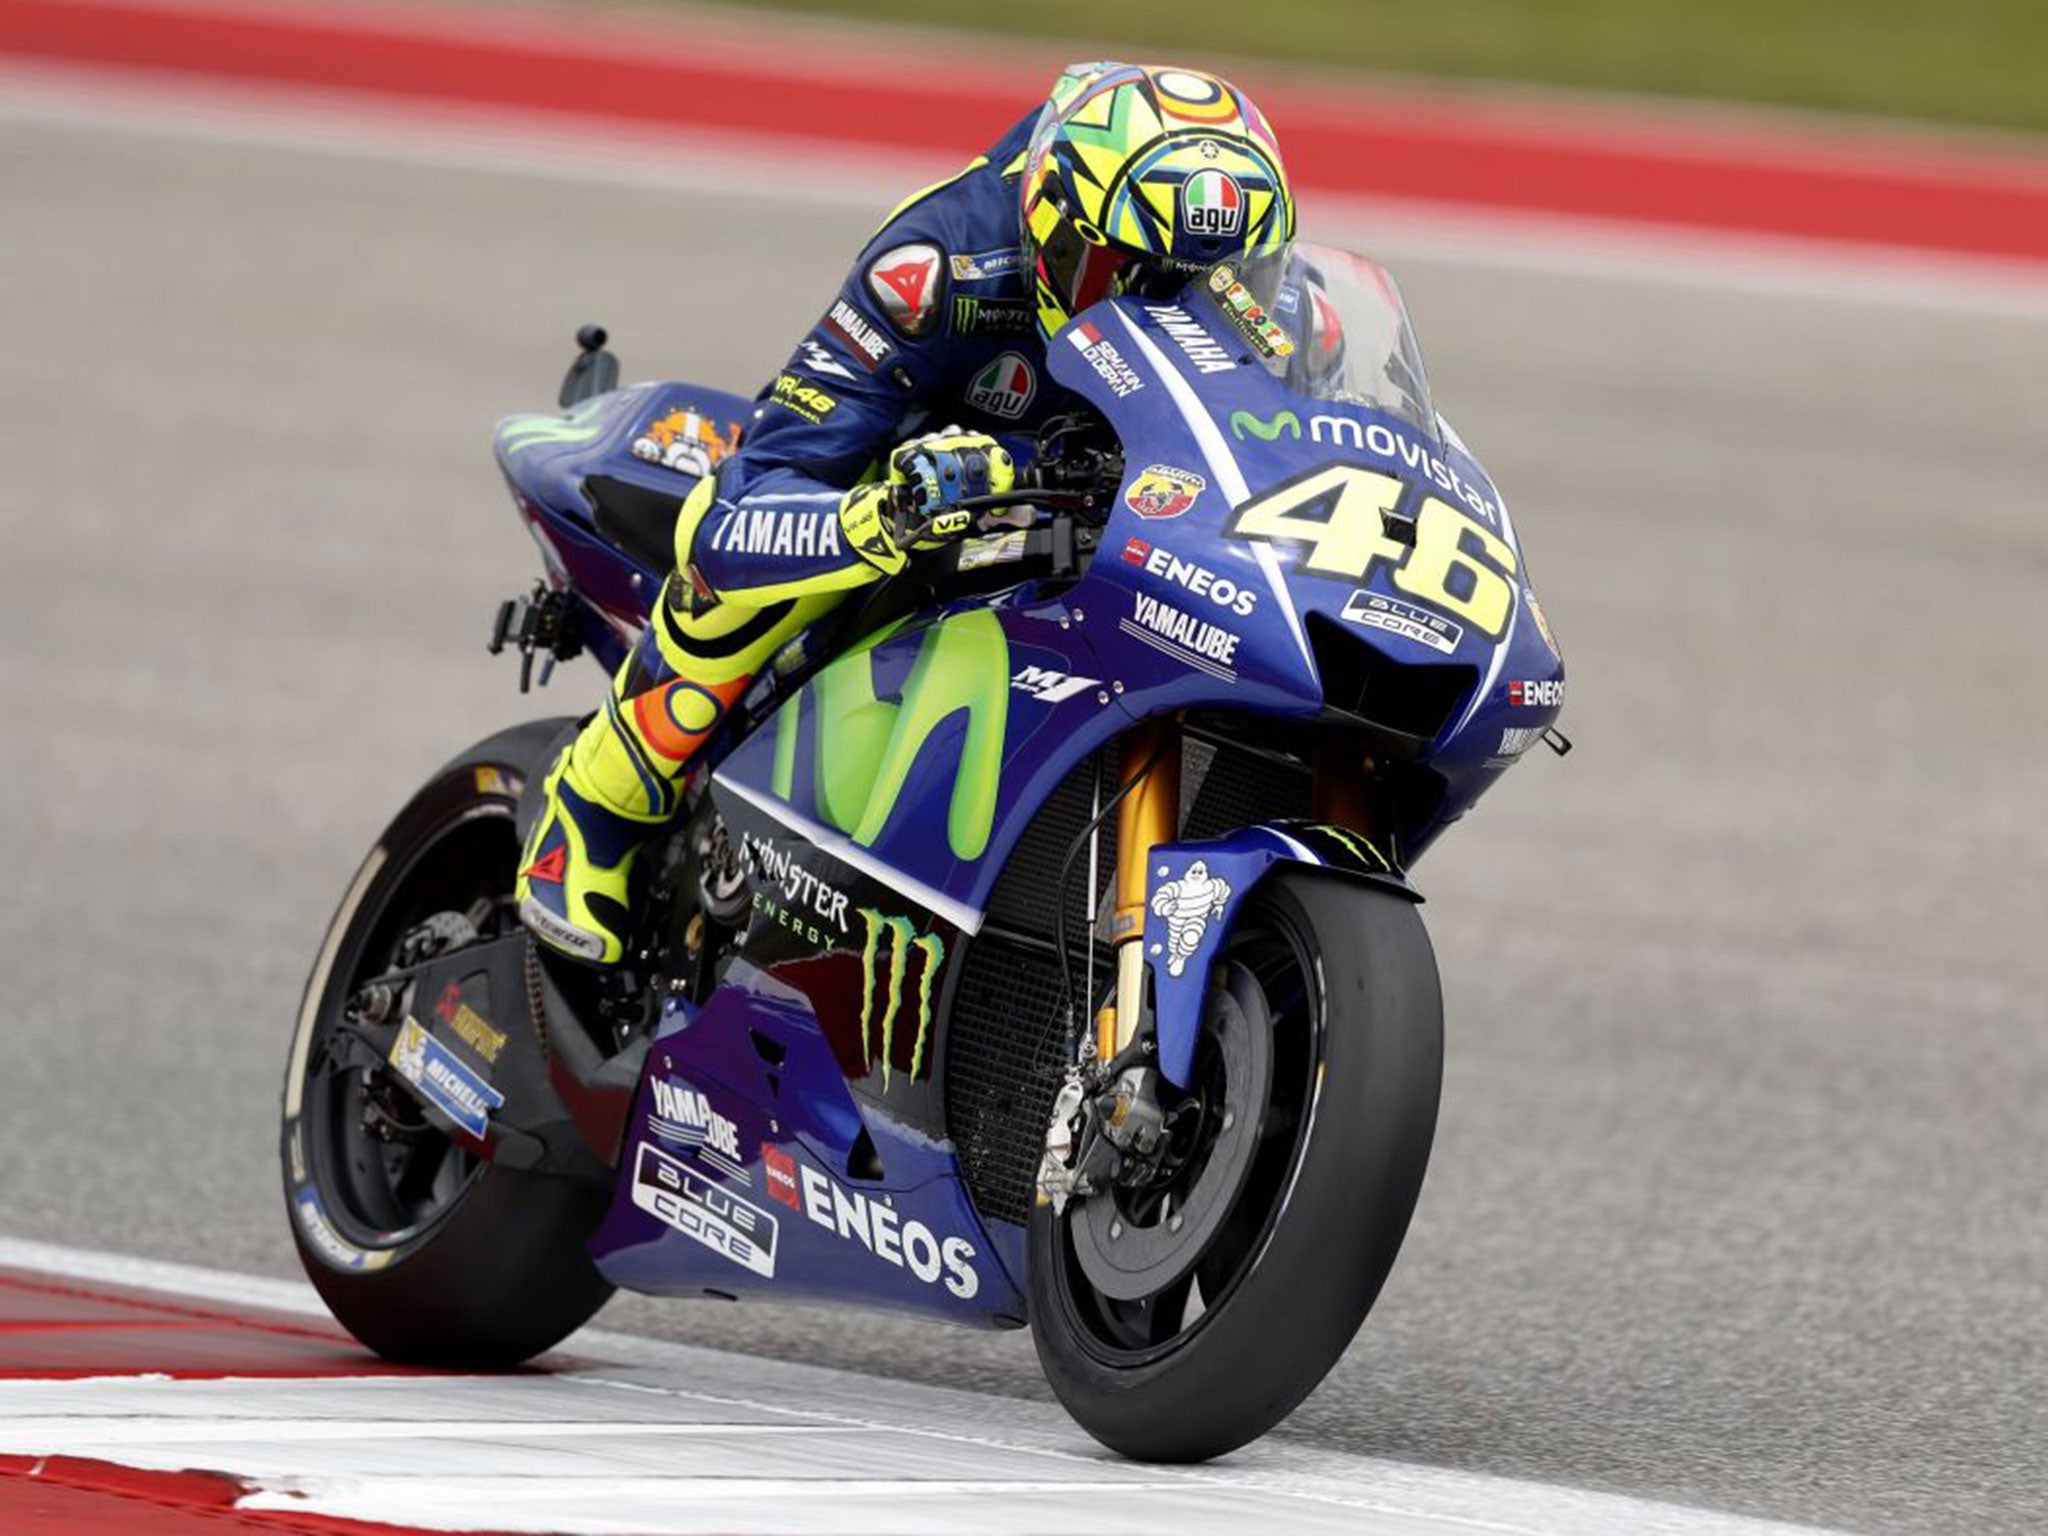 Valentino Rossi received a time penalty for cutting turn four after clashing with Johann Zarco